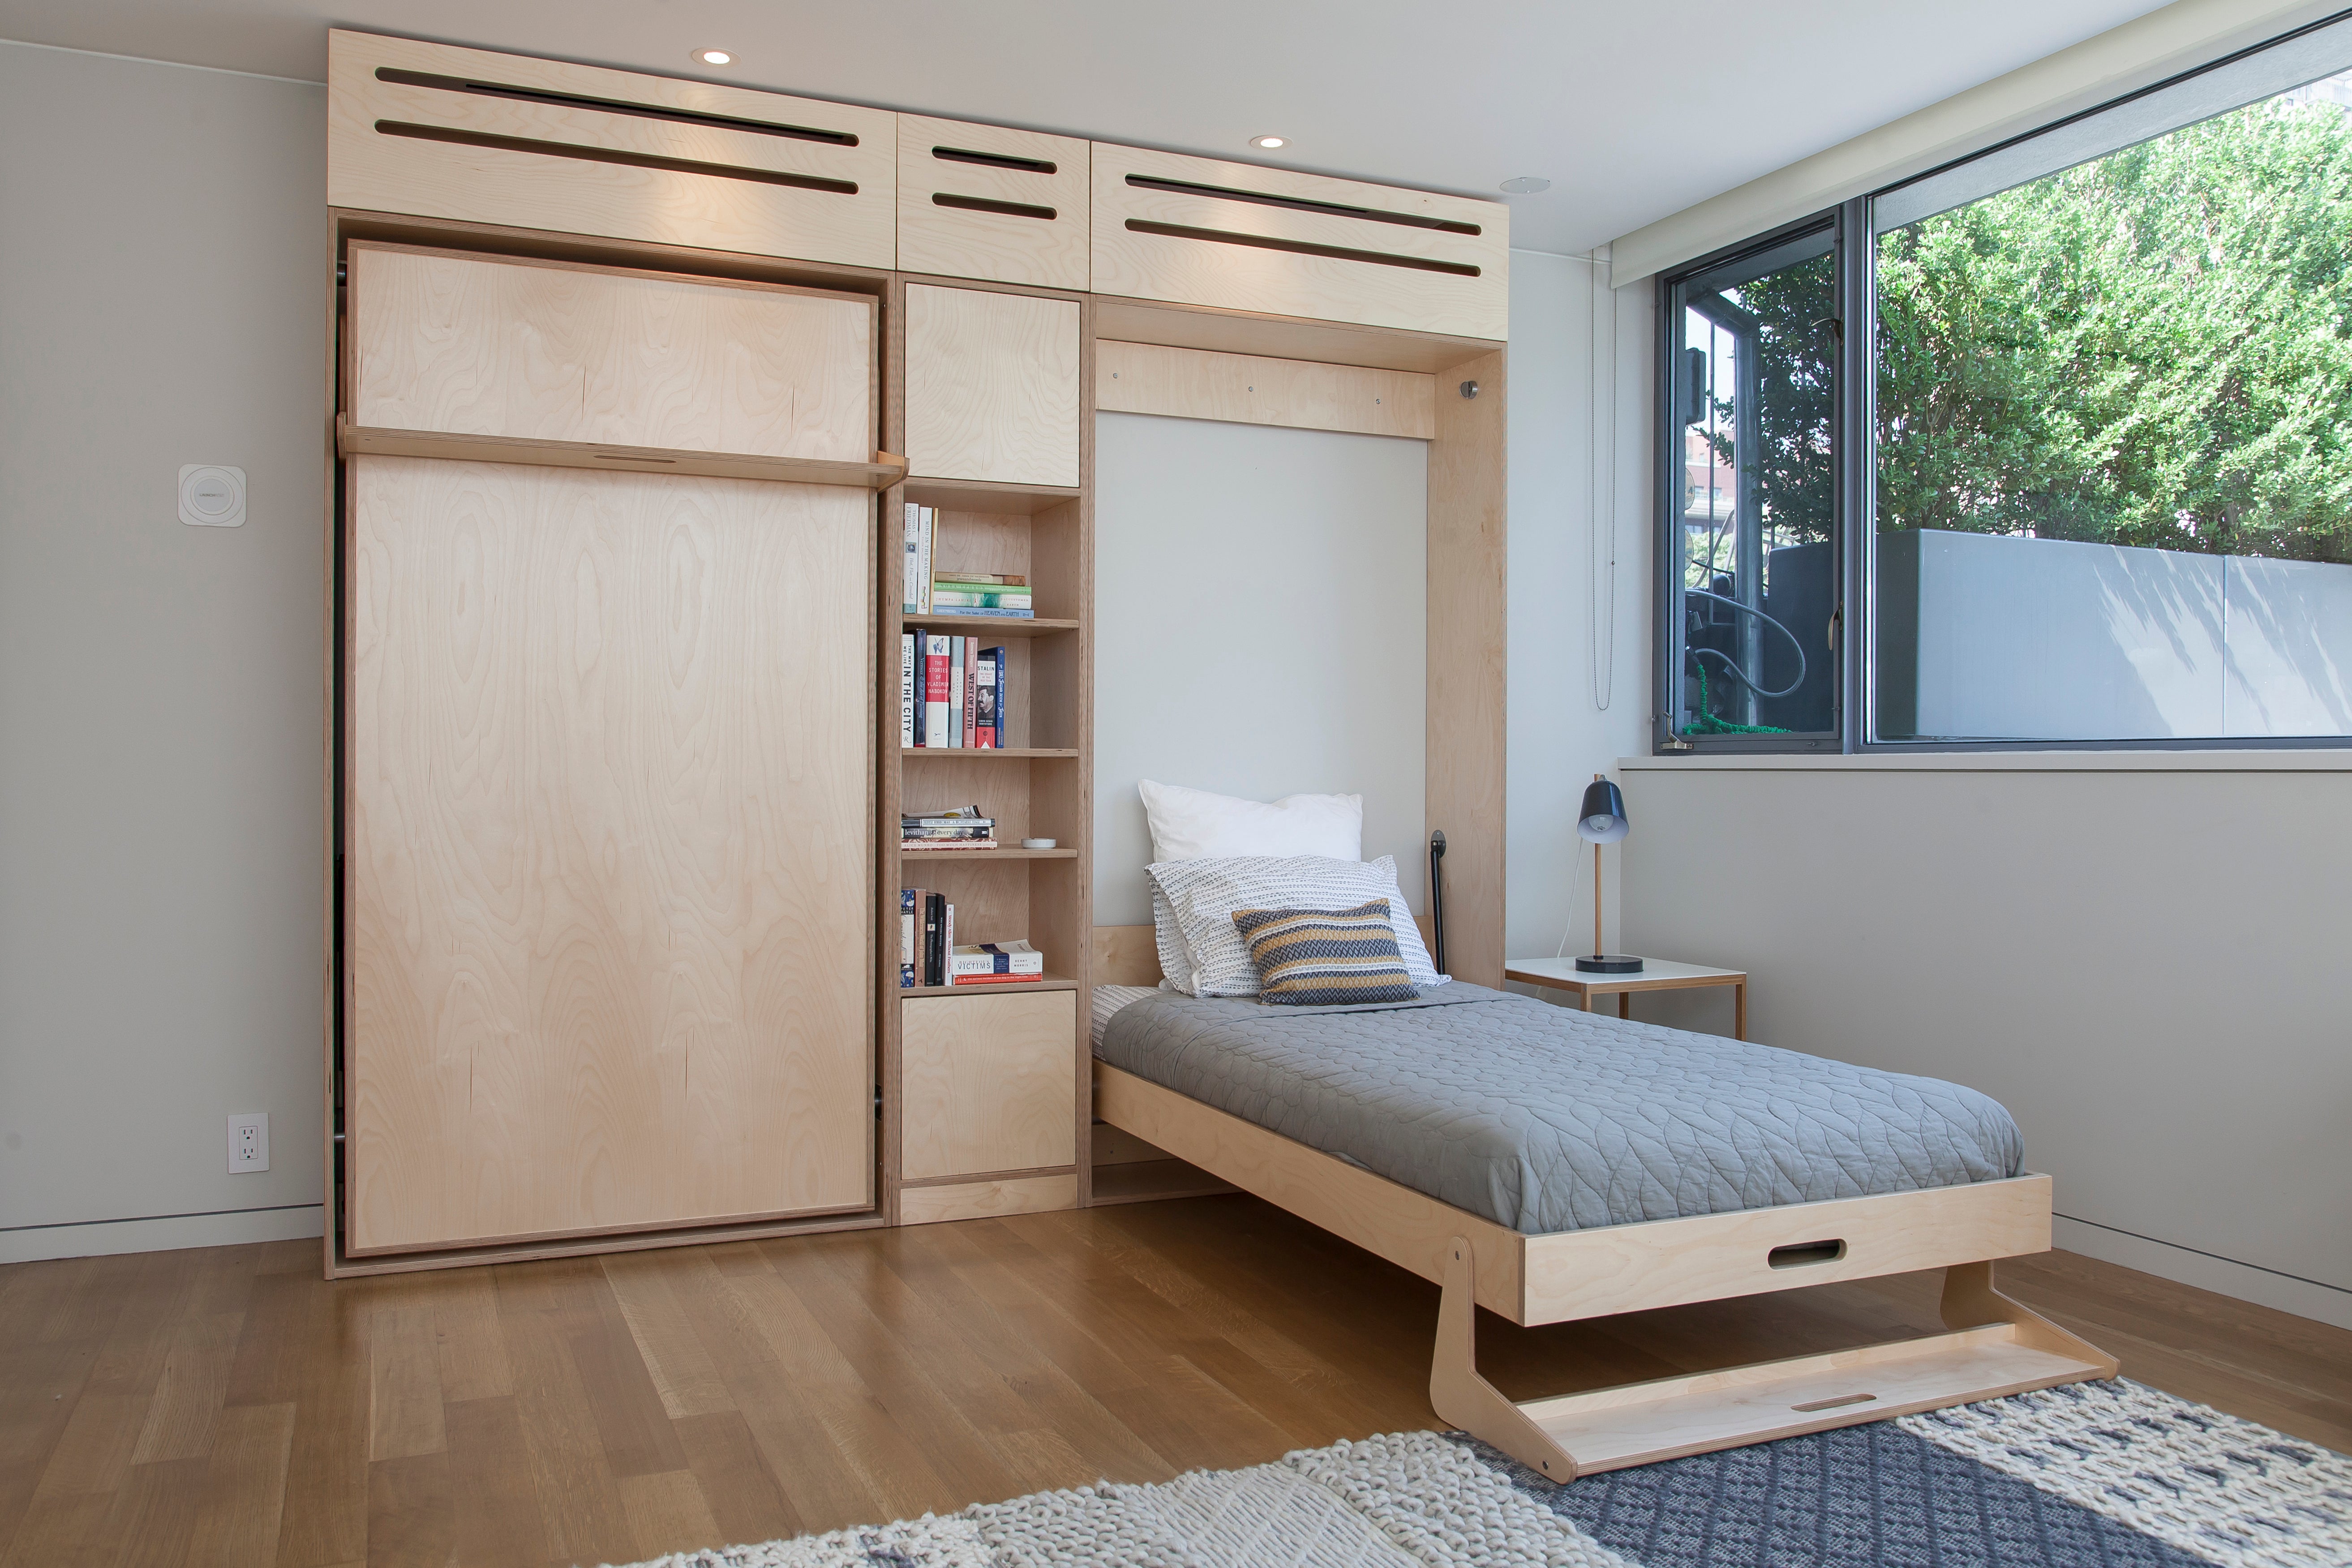 Modern room with a Murphy bed, wooden cabinets, and a large window.